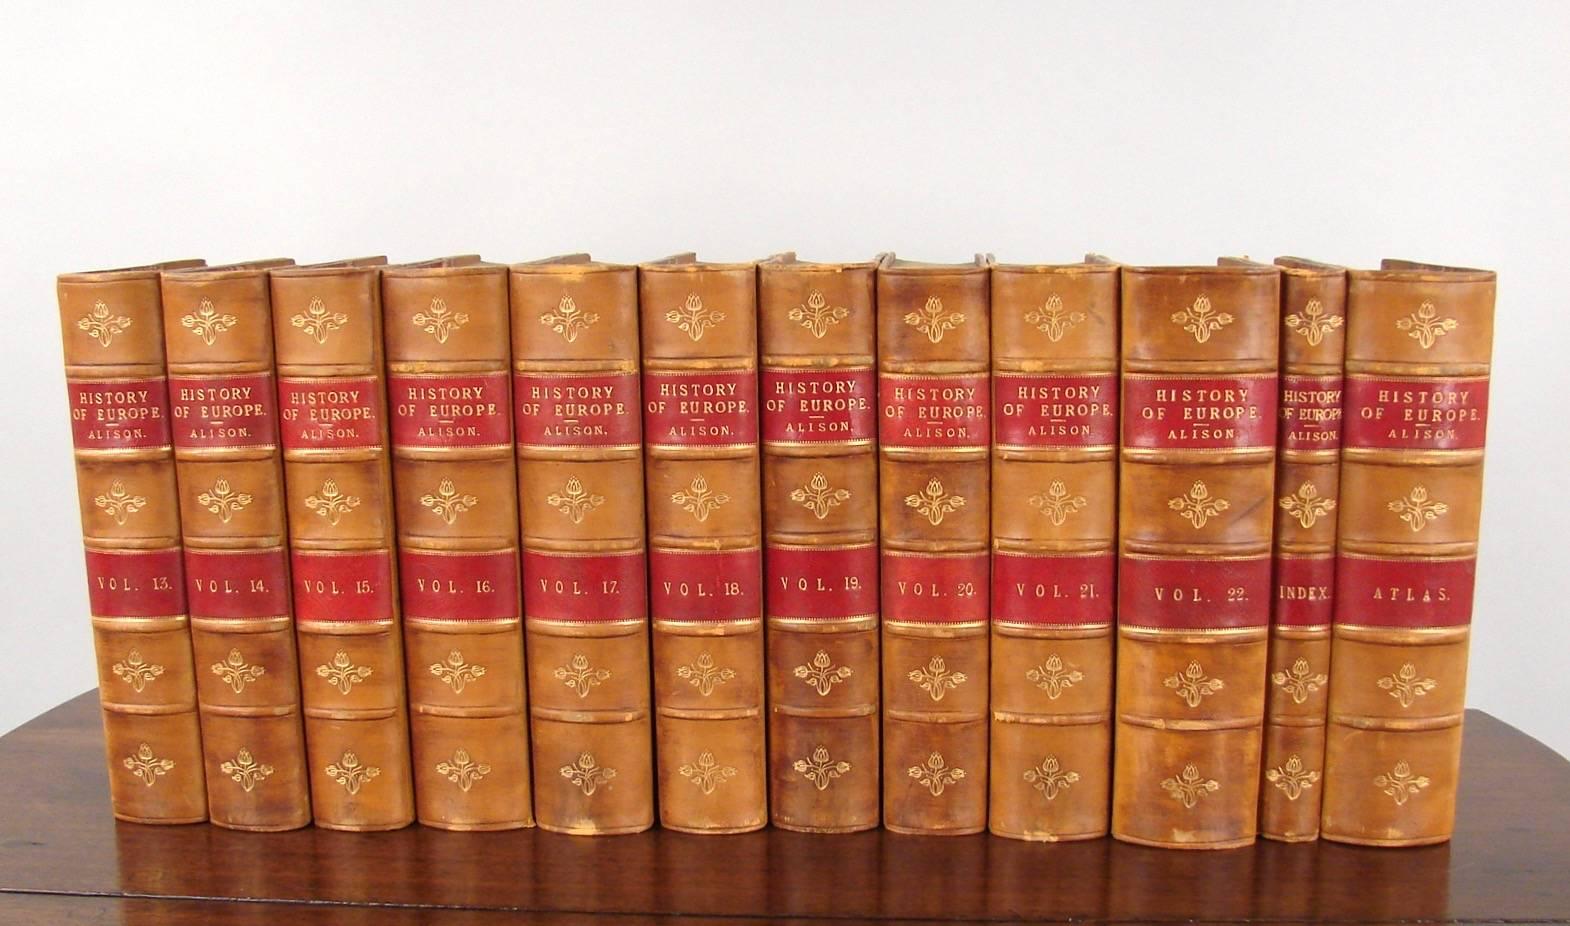 A fine and complete set of 24 volumes, History of Europe by Archibald Alison, a famous historian of the times, nicely bound in caramel colored leather with red leather labels on spines, interior with marbleized paper. This set includes the hard to